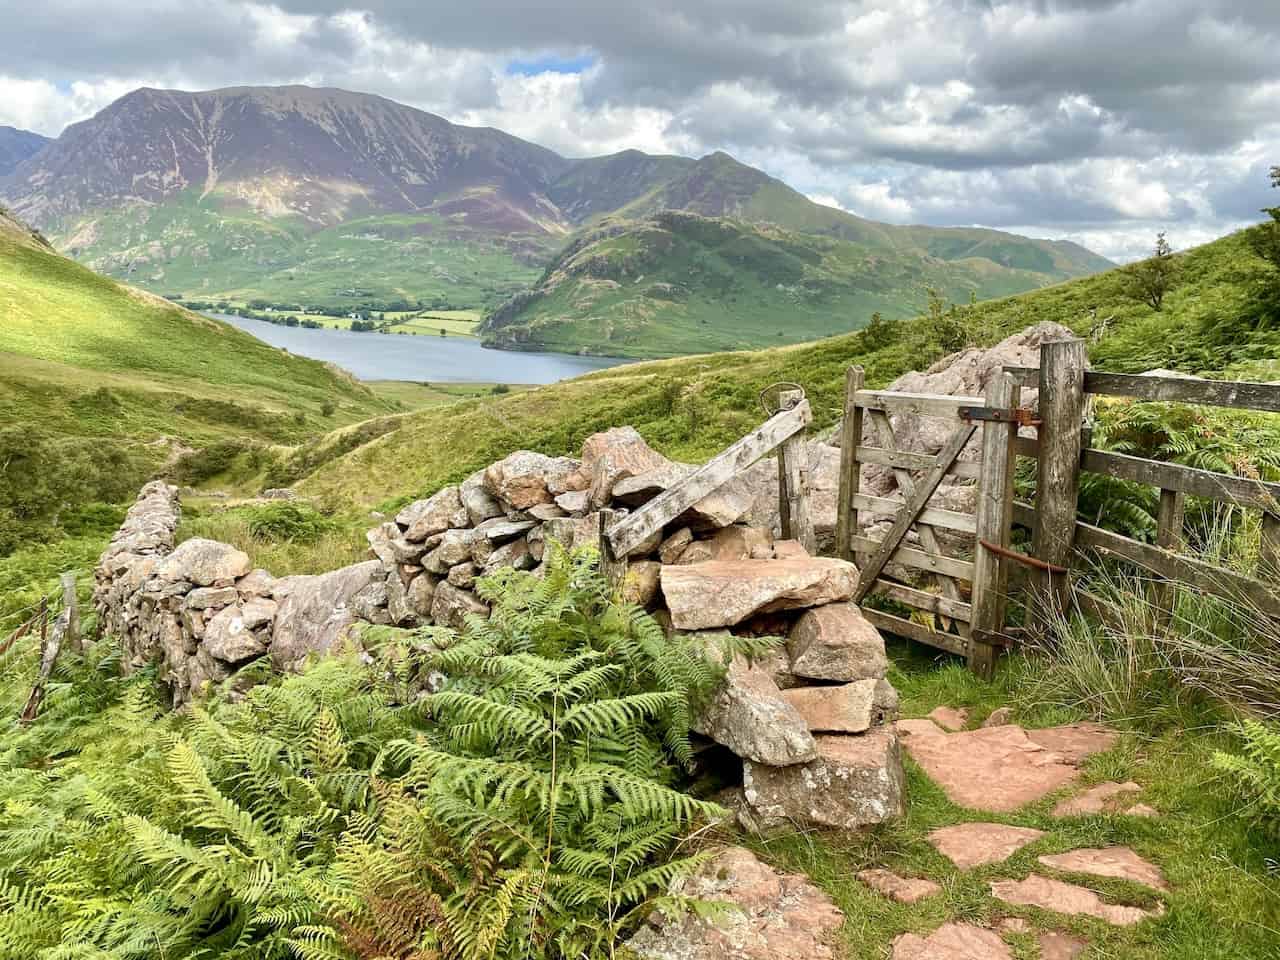 The route from Scale Force down to Crummock Water. We're almost halfway through our Mellbreak walk.